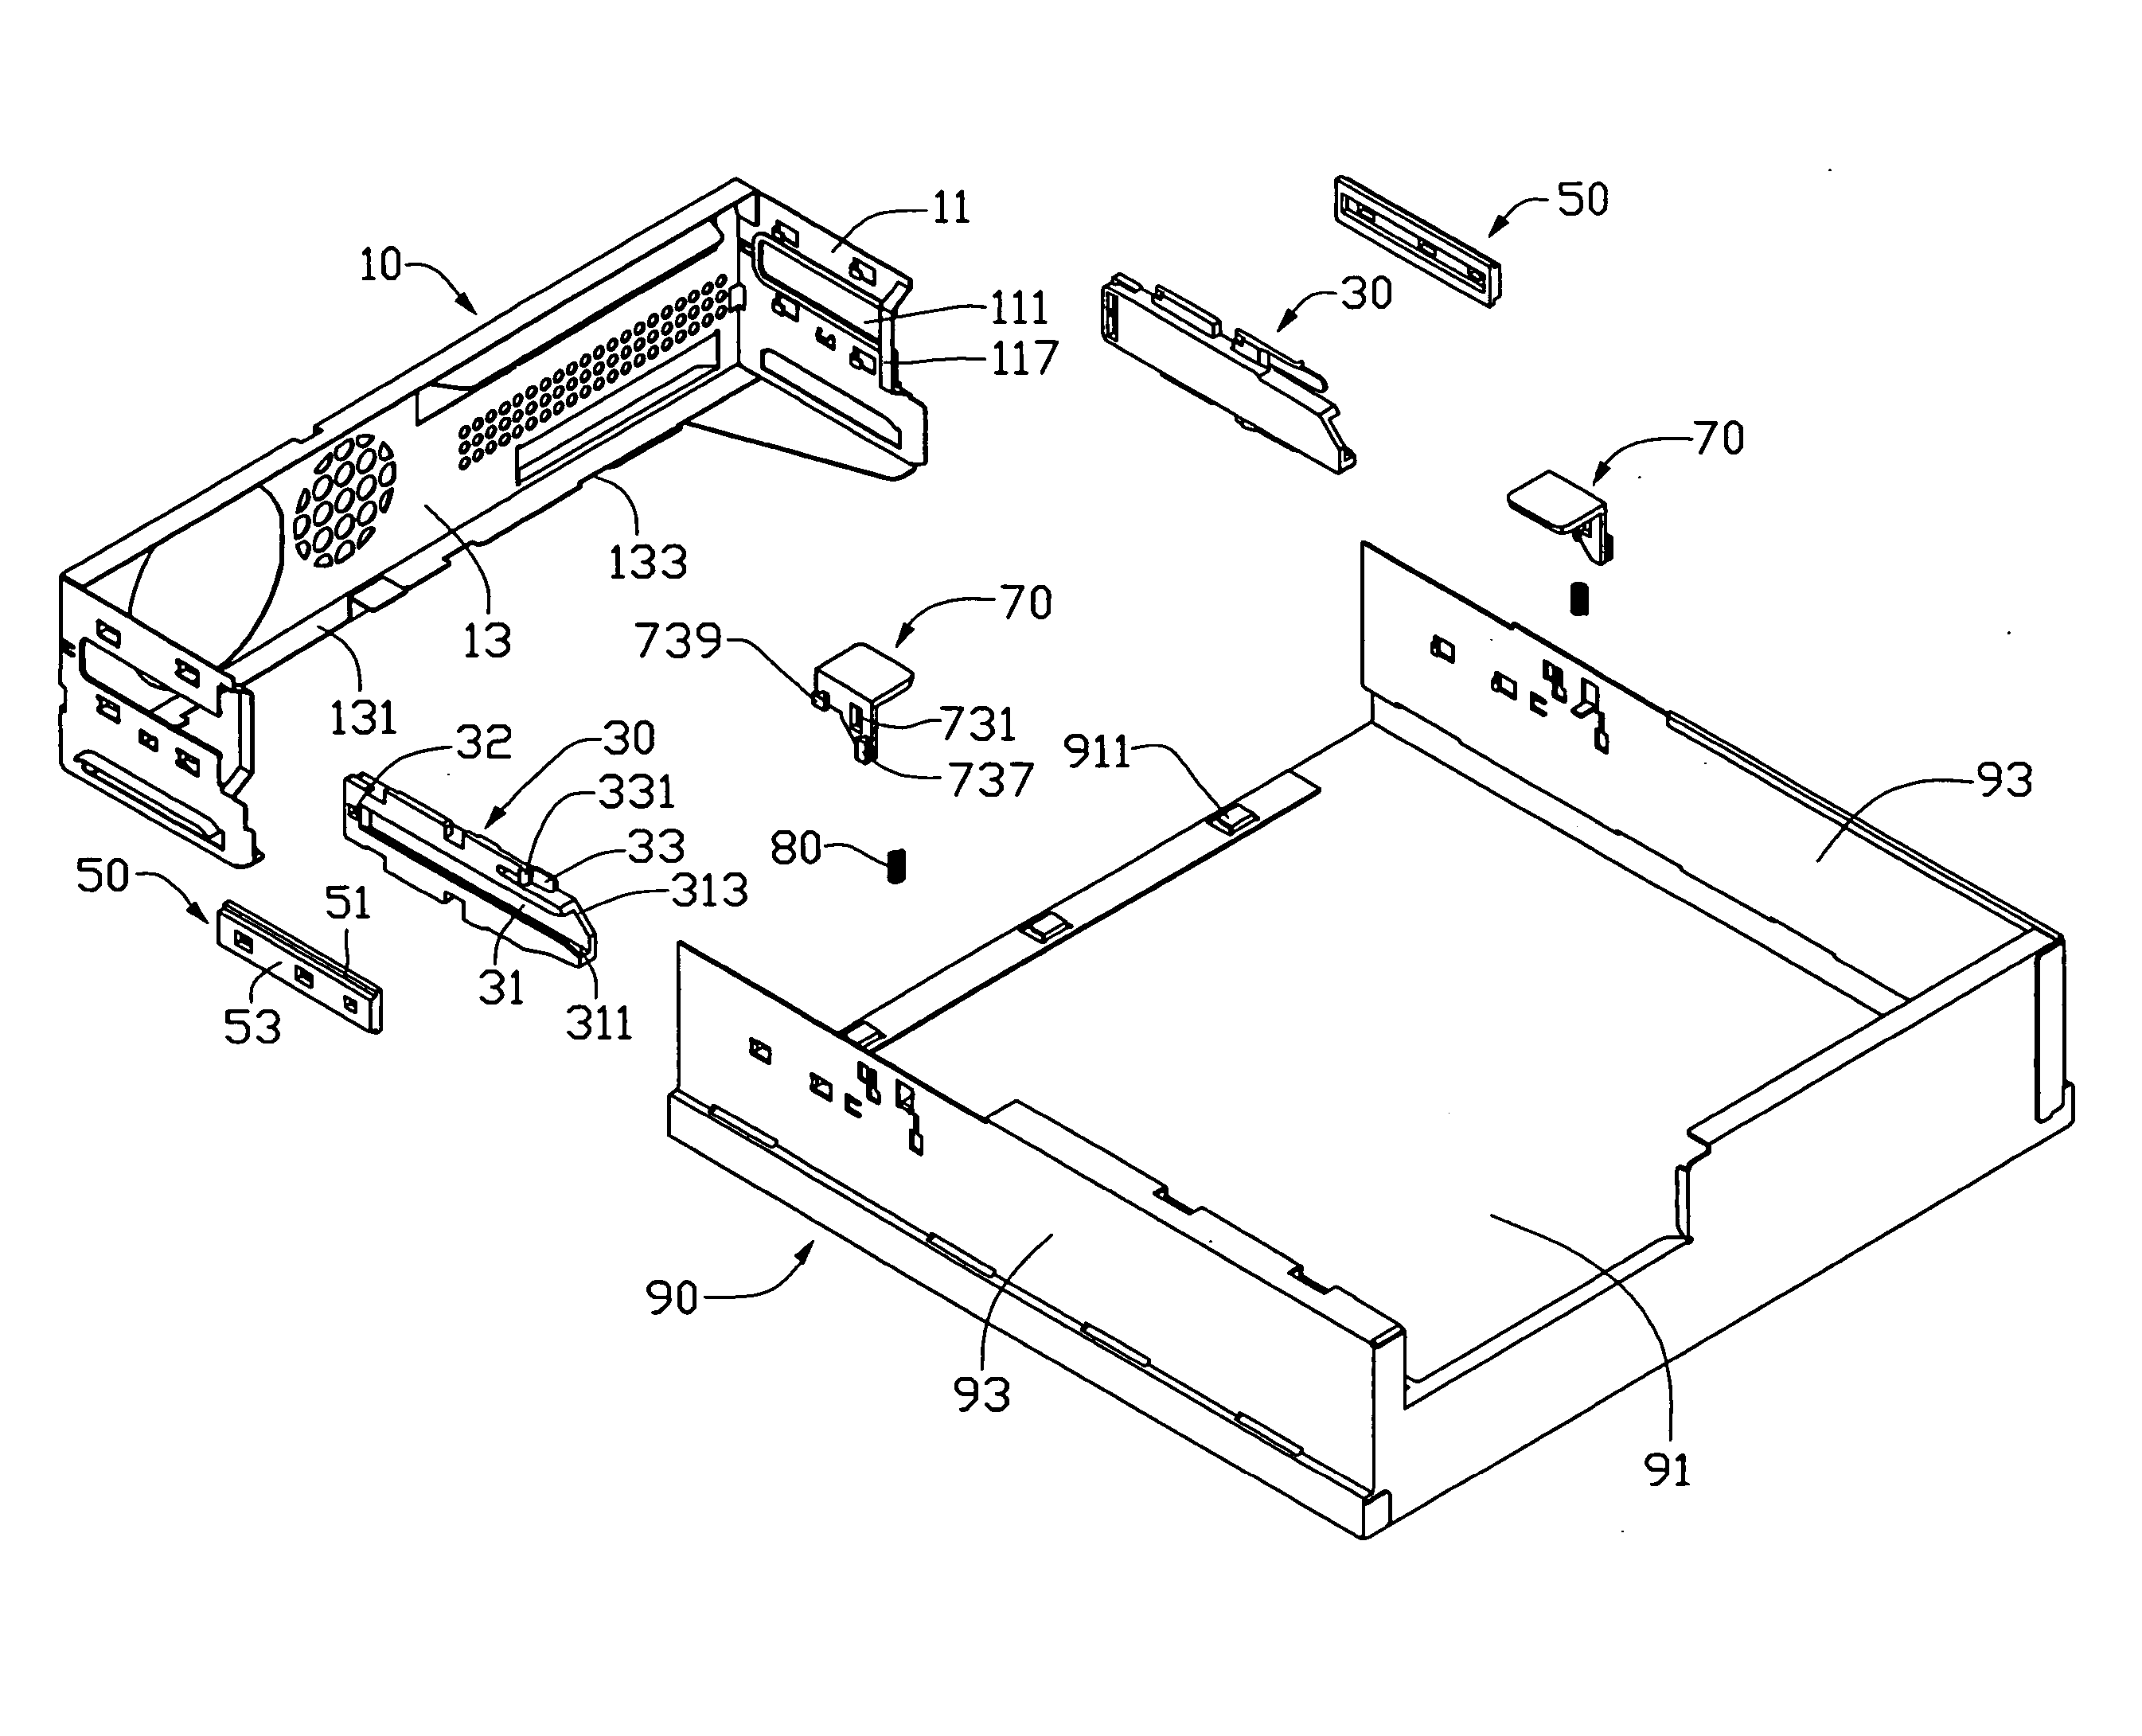 Mounting assembly of computer enclosure